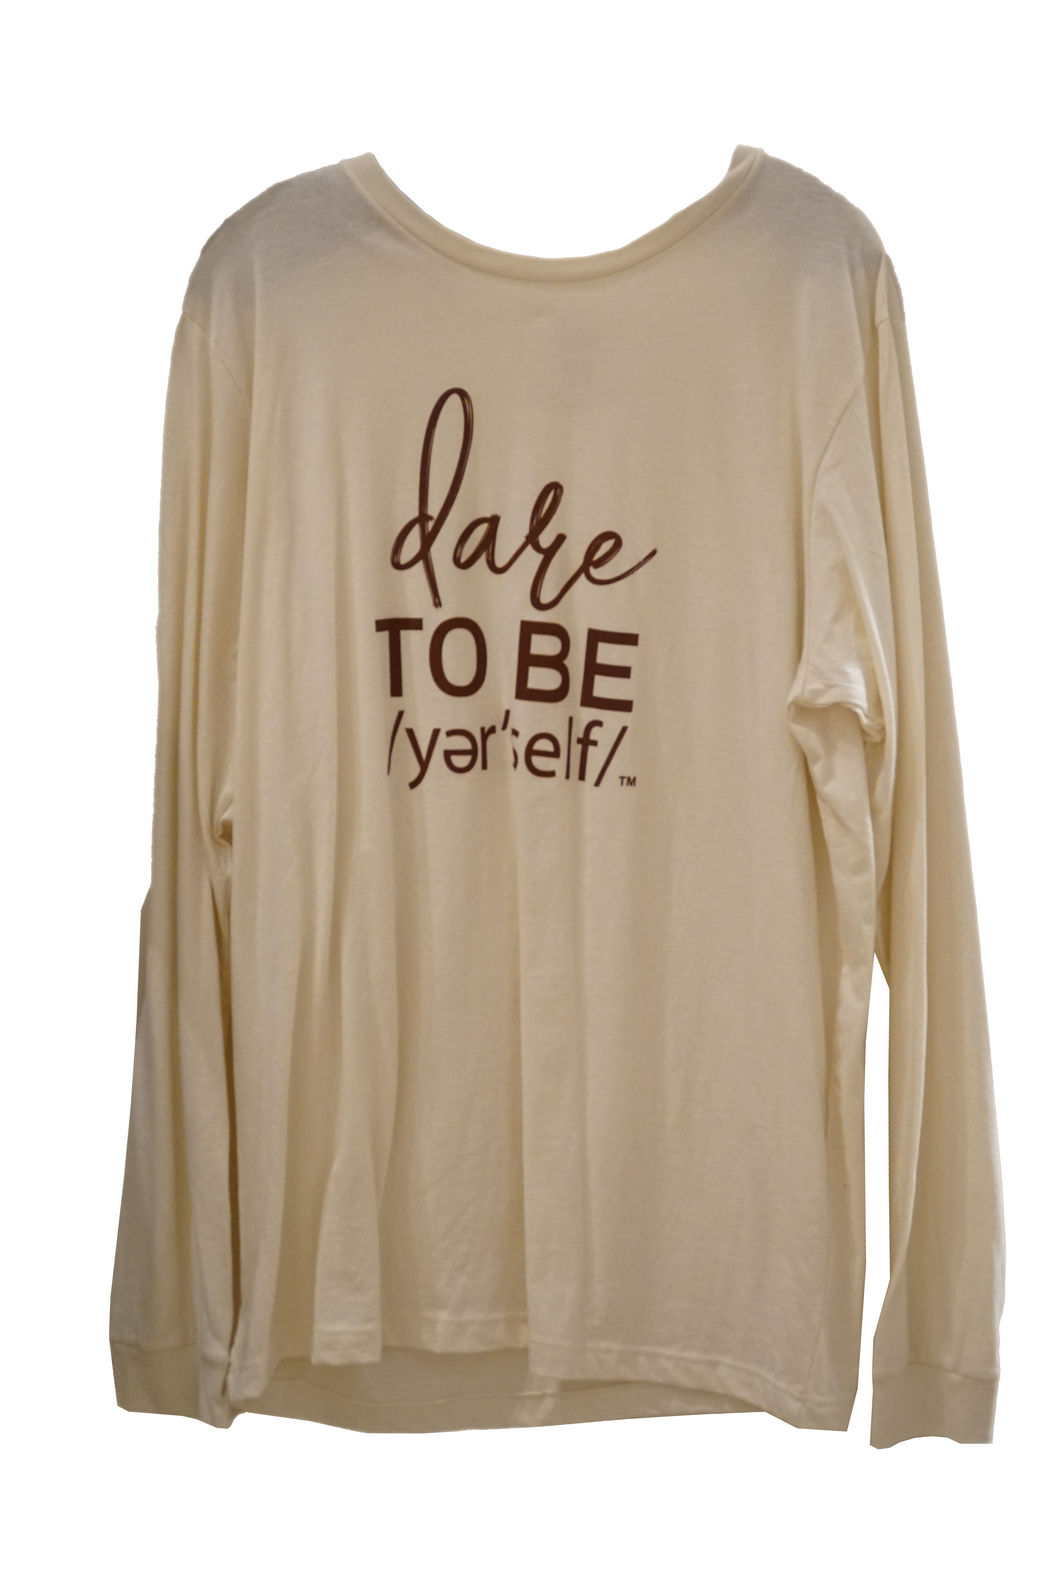 TAN LONG SLEEVE TEE WITH DTB YER'SELF